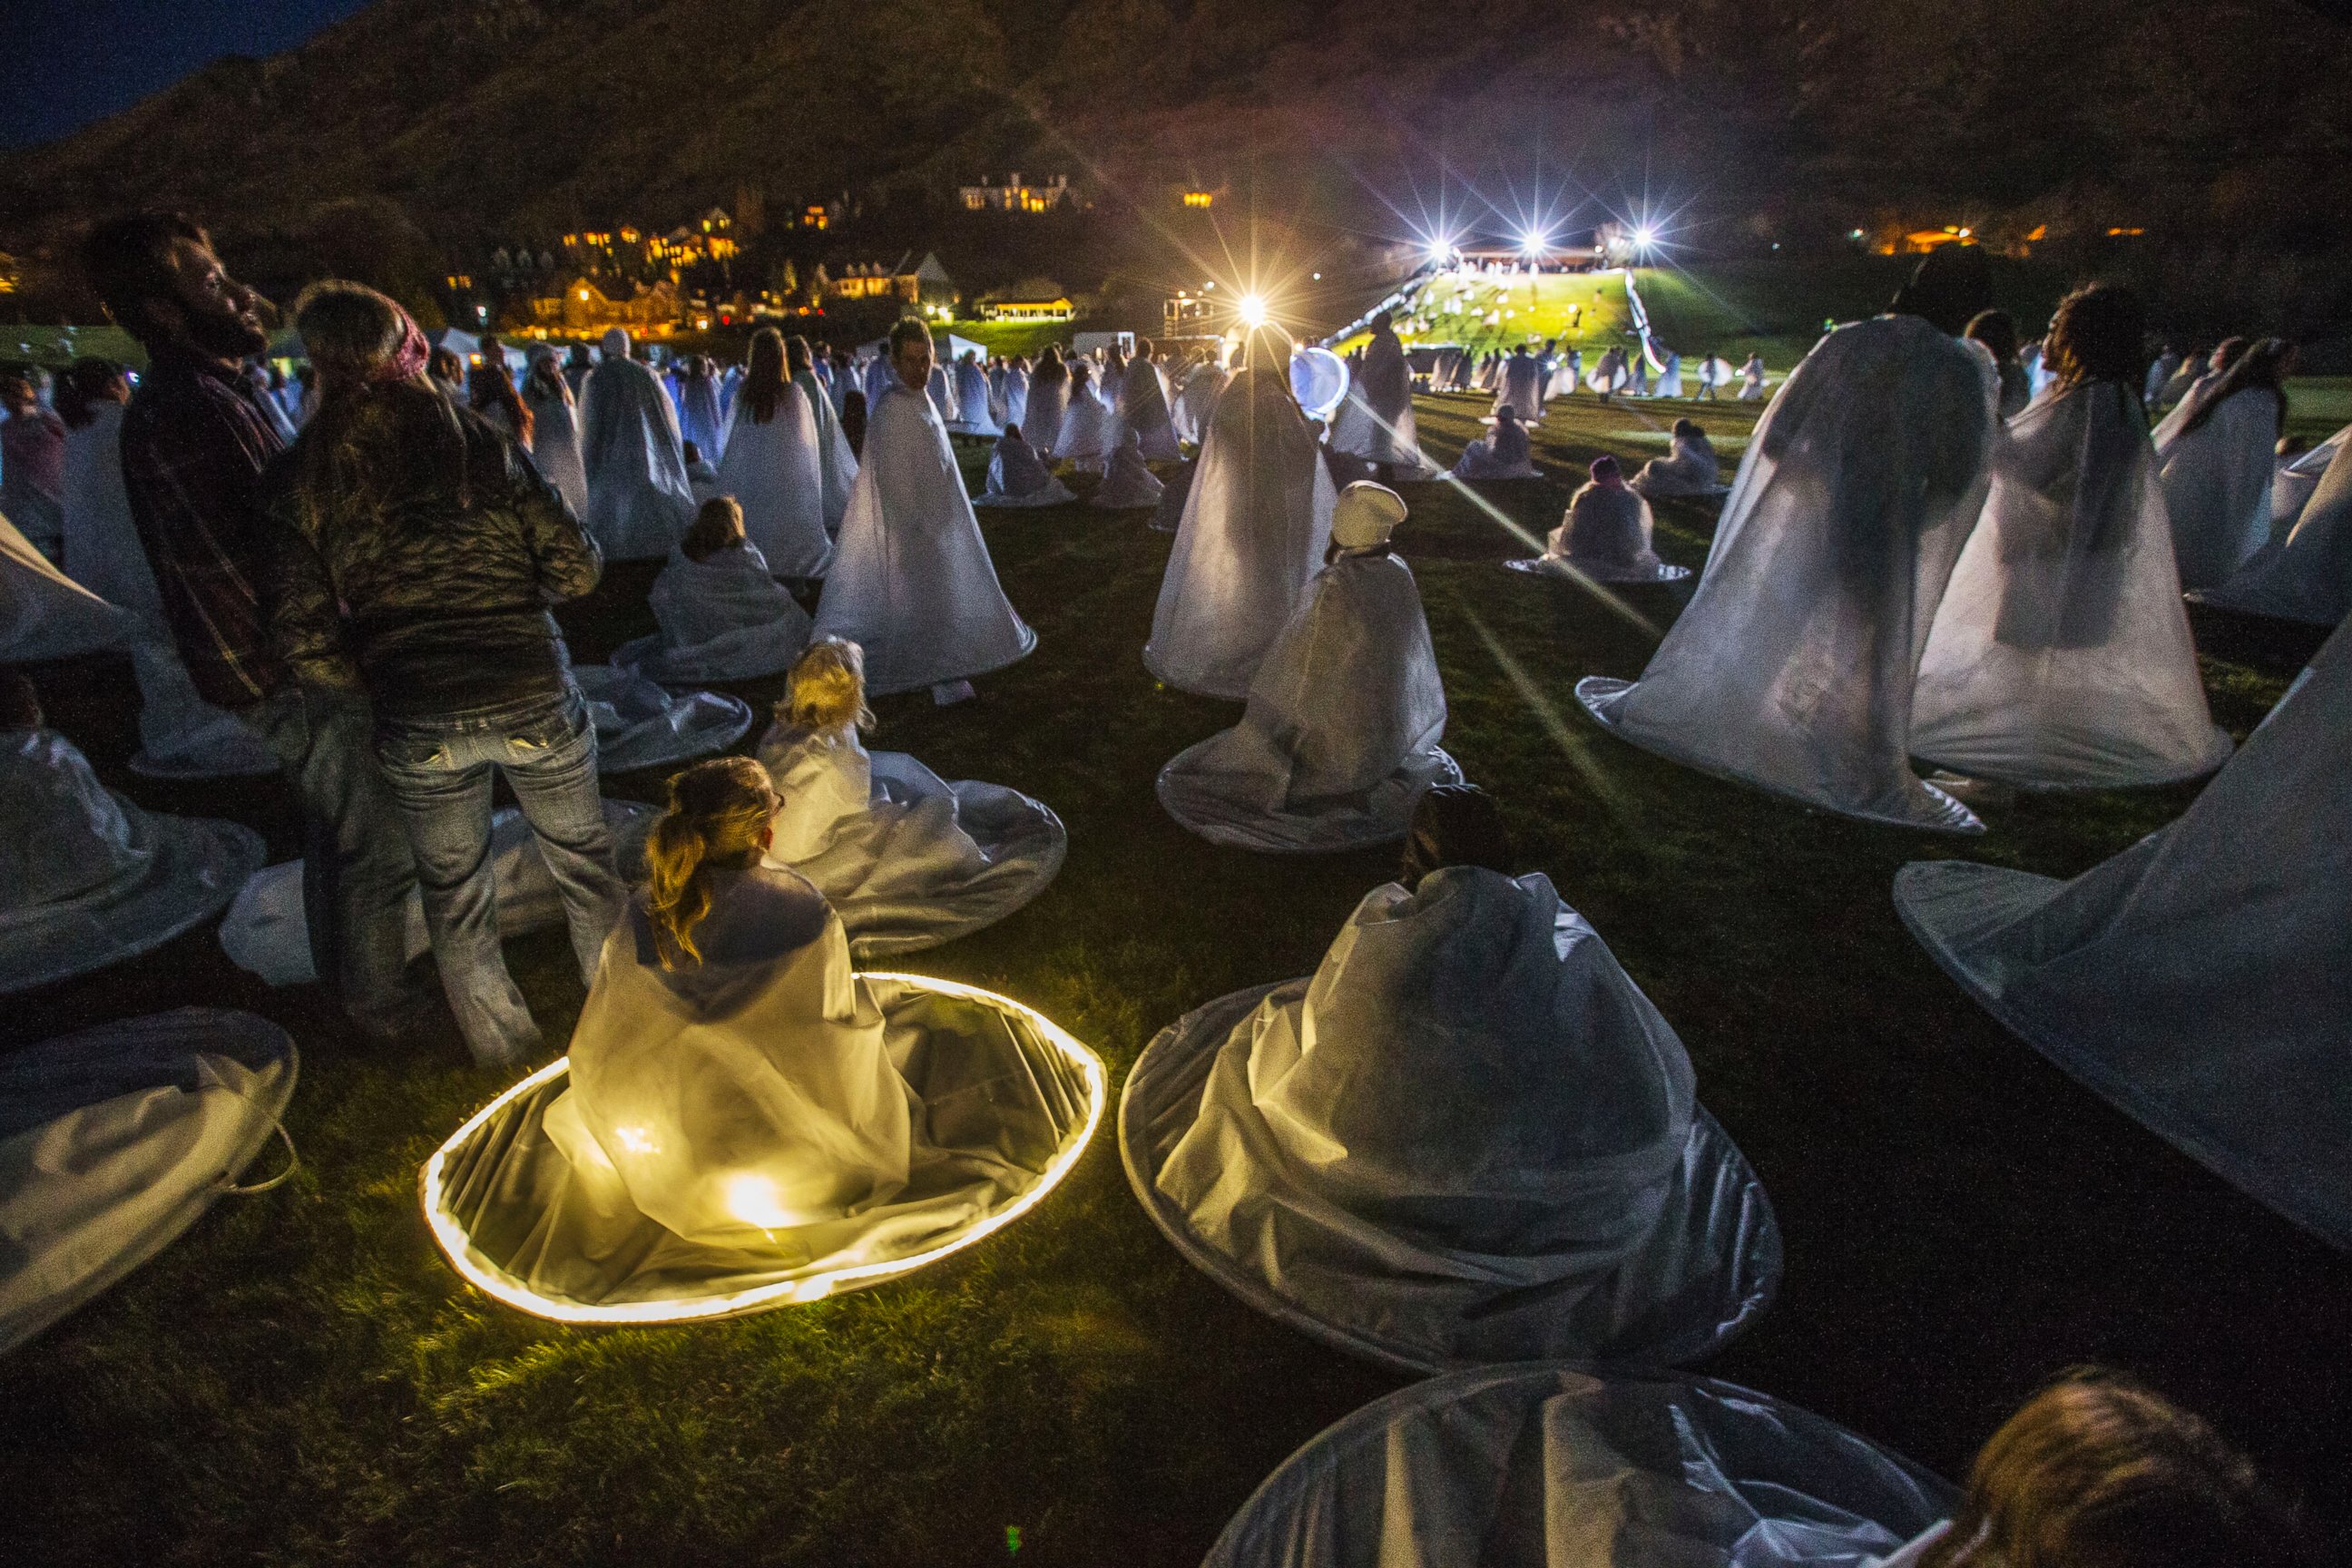 PHOTO: More than 1,000 participants gather at Rock Canyon Park in Provo, Utah, in an attempt to set a world record for the largest recreation of a live Nativity scene, Dec. 1, 2014. 